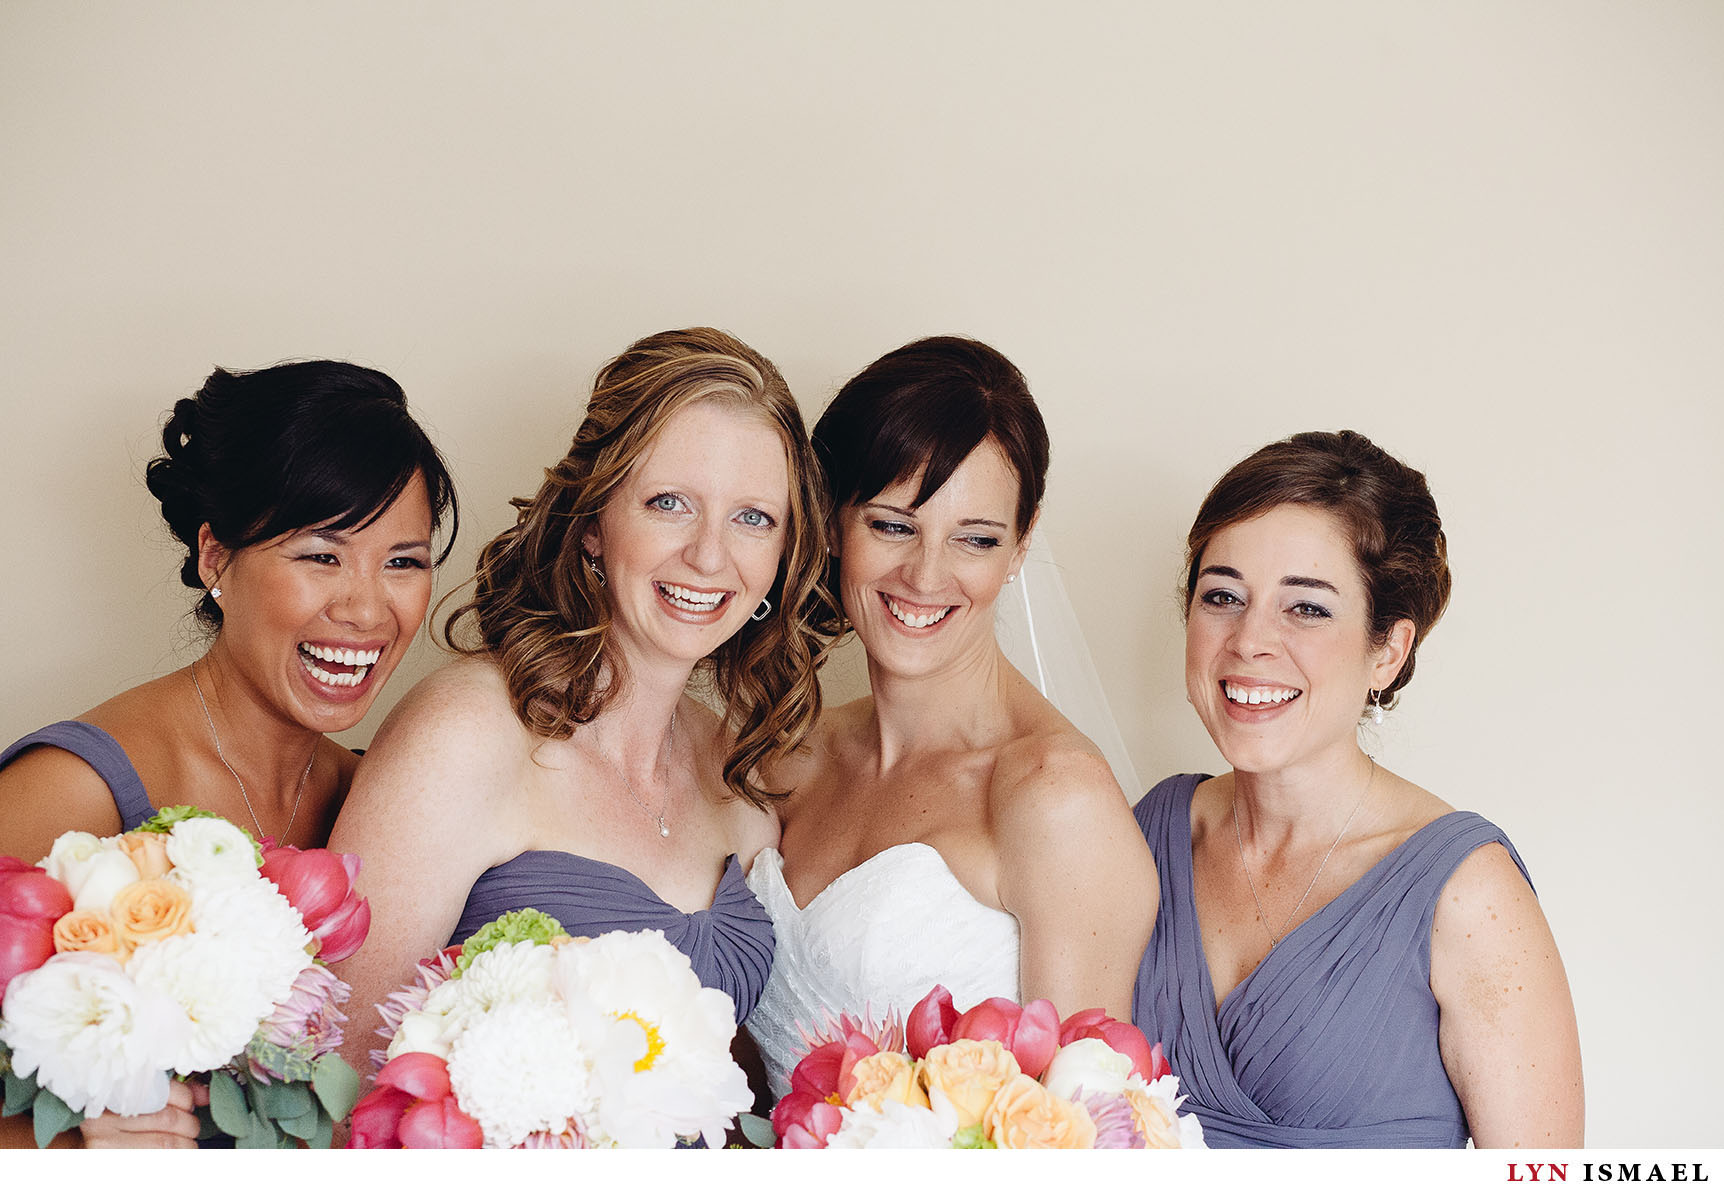 Portrait of the bride and her bridesmaids.